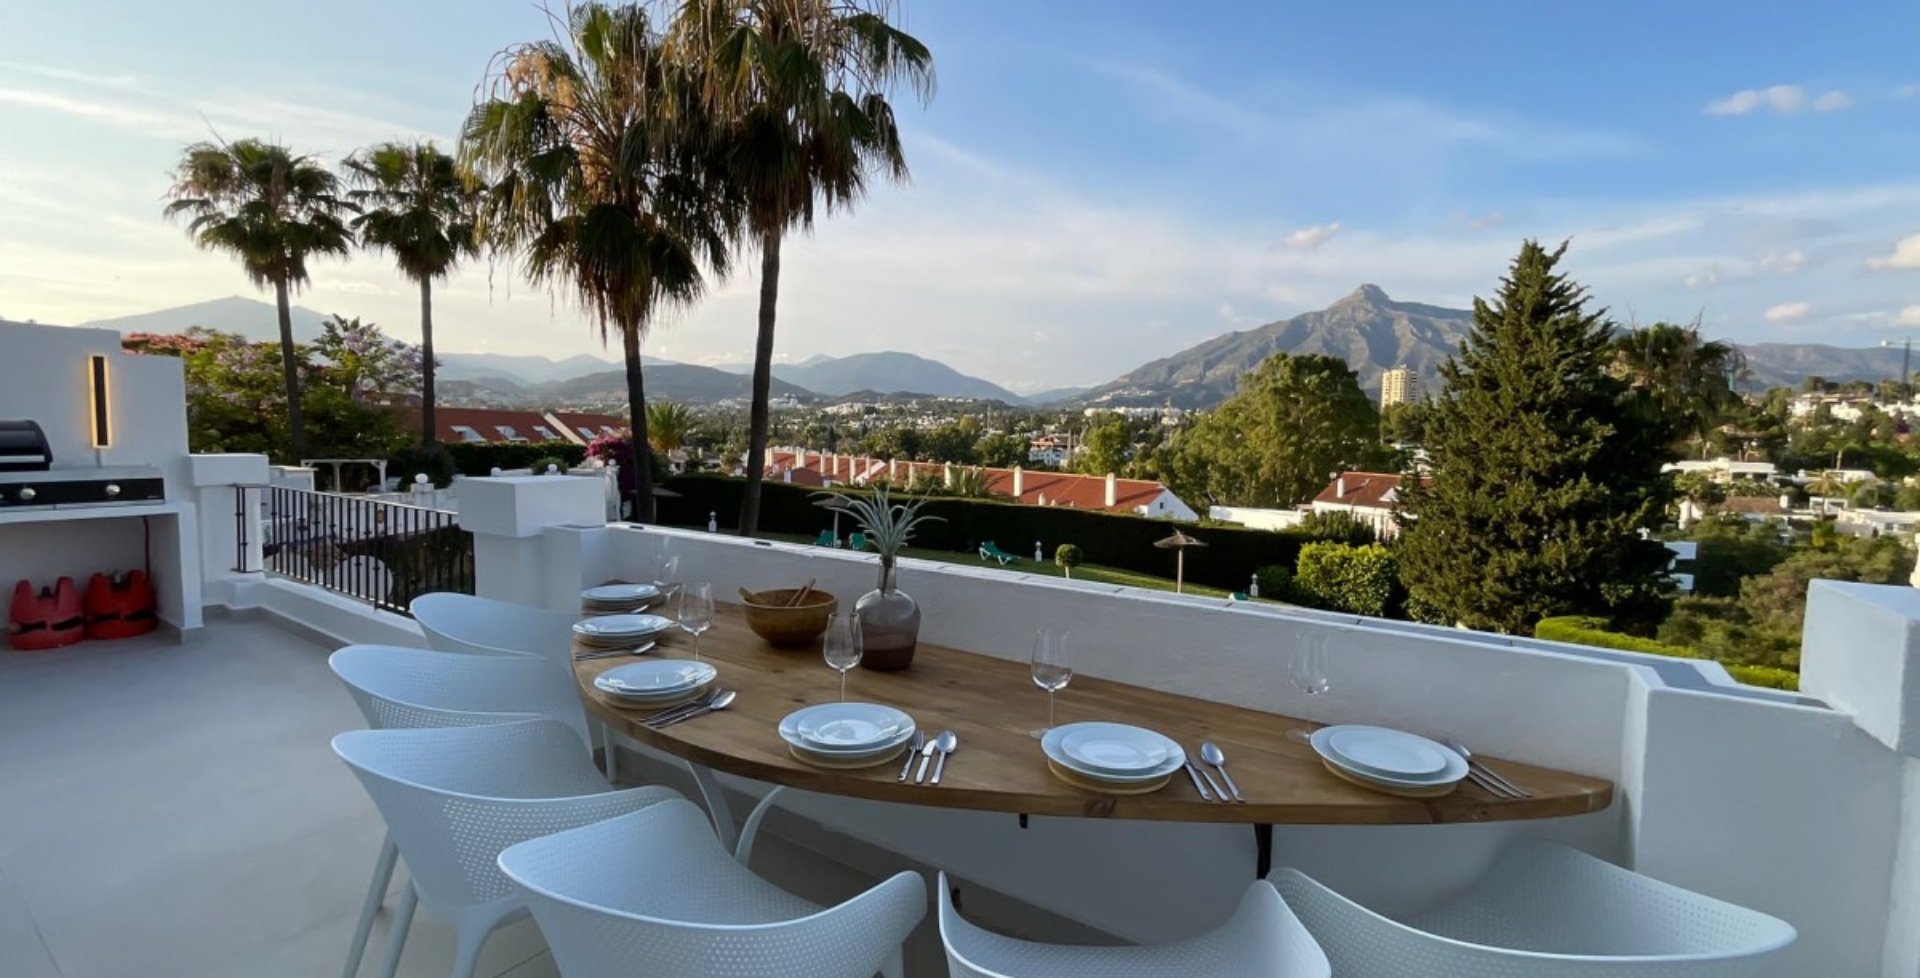 4 bed luxapart3 – outside dining2